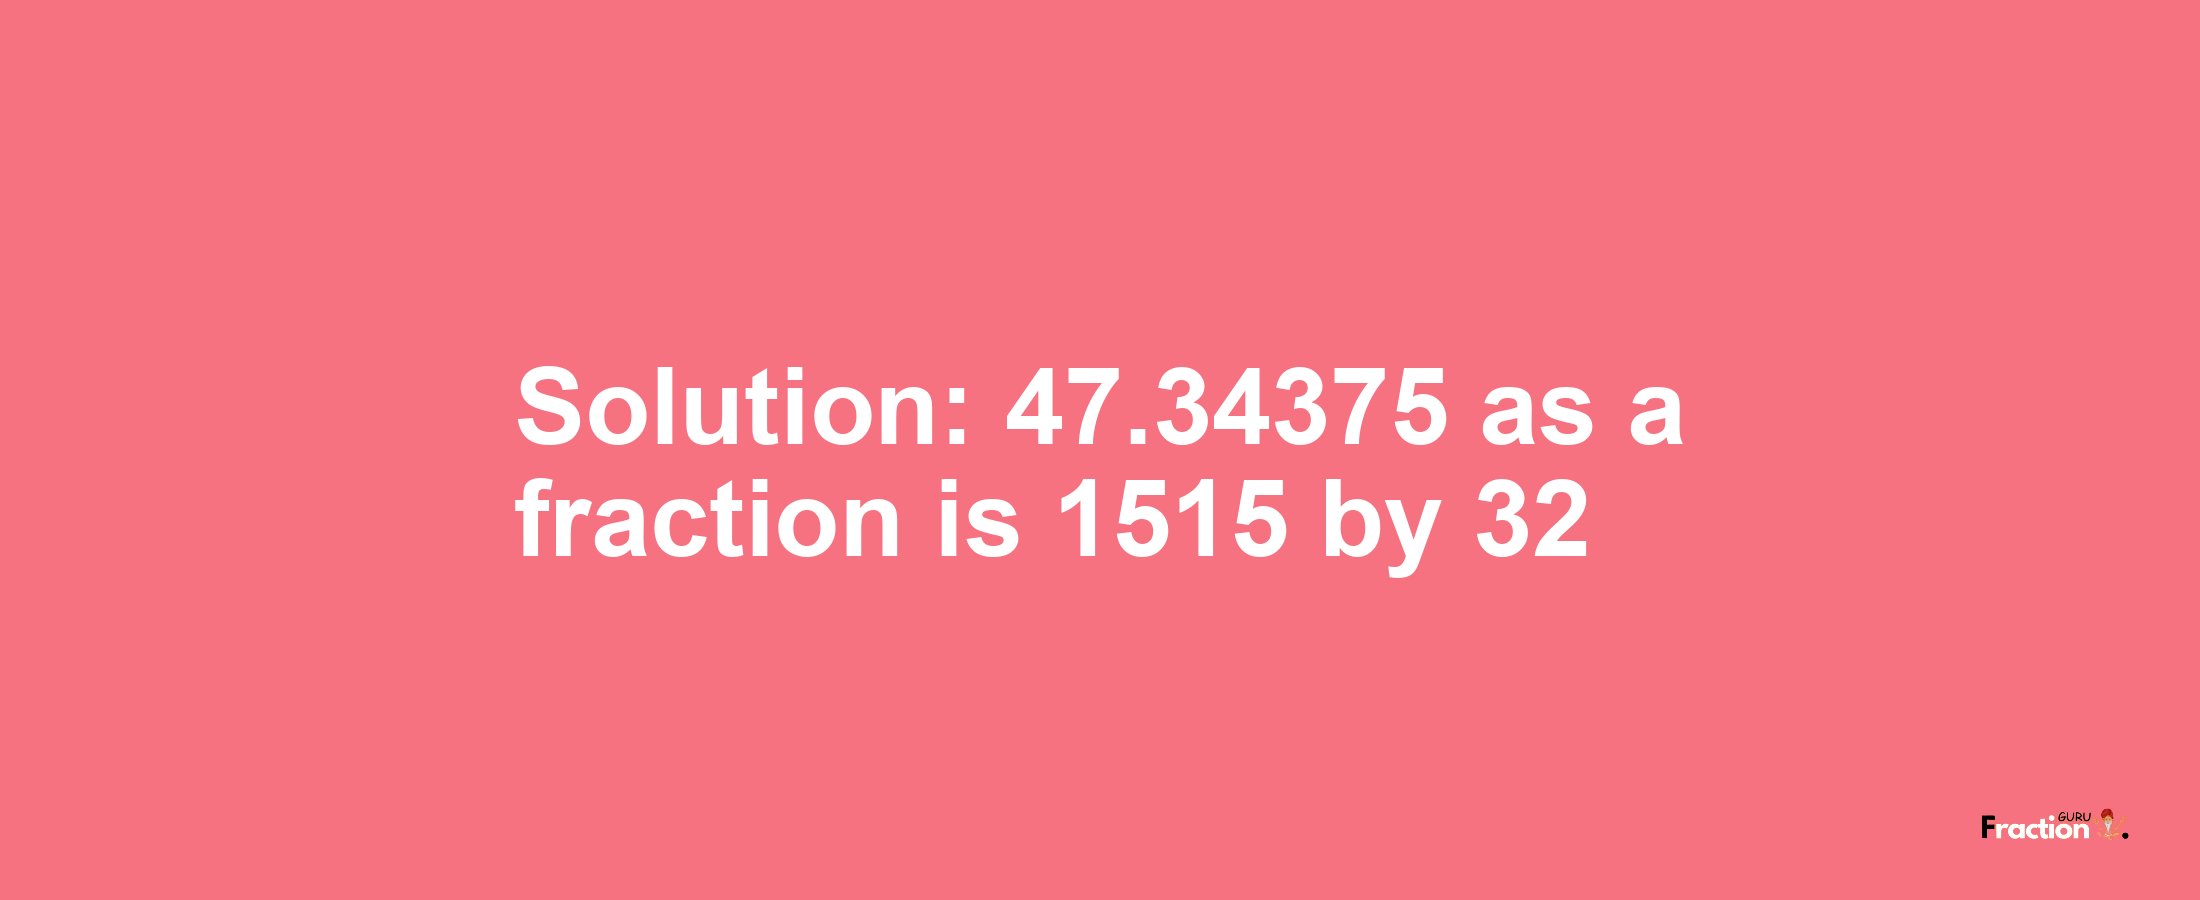 Solution:47.34375 as a fraction is 1515/32